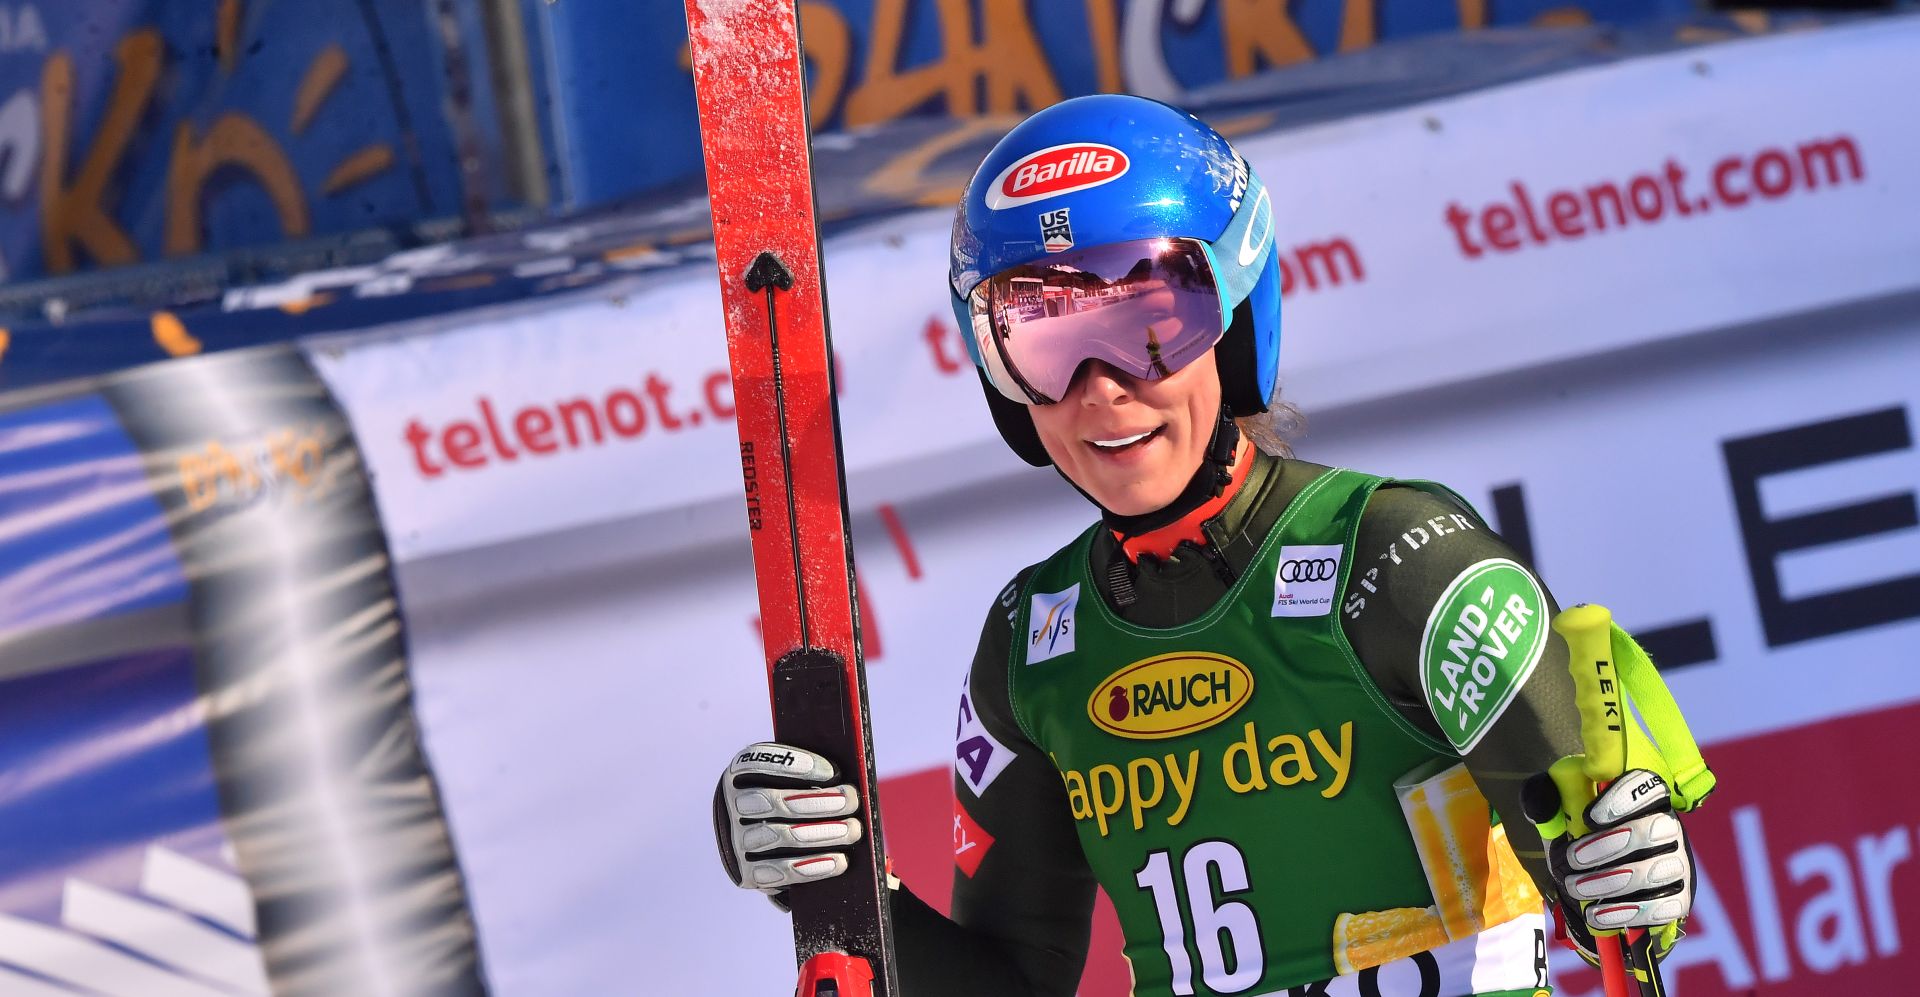 epa08157856 Mikaela Shiffrin of United States reacts in the finish area after the Women's Downhill race at the FIS Alpine Skiing World Cup in Bansko, Bulgaria on 24 January 2020.  EPA/GEORGI LICOVSKI